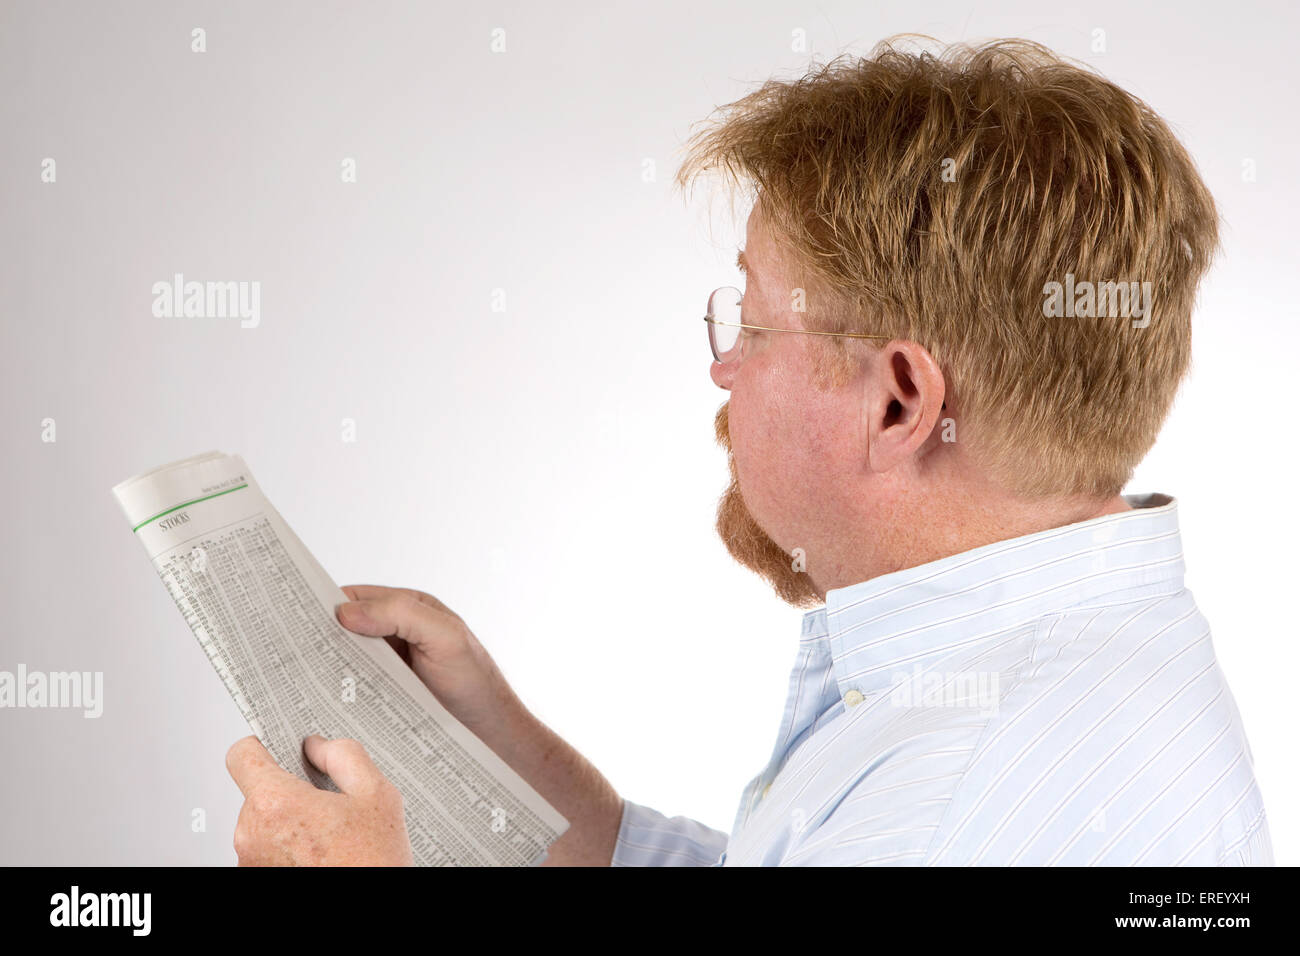 Mature male reads the stock market report in the newspaper to glean financial information and improve his investments. Stock Photo